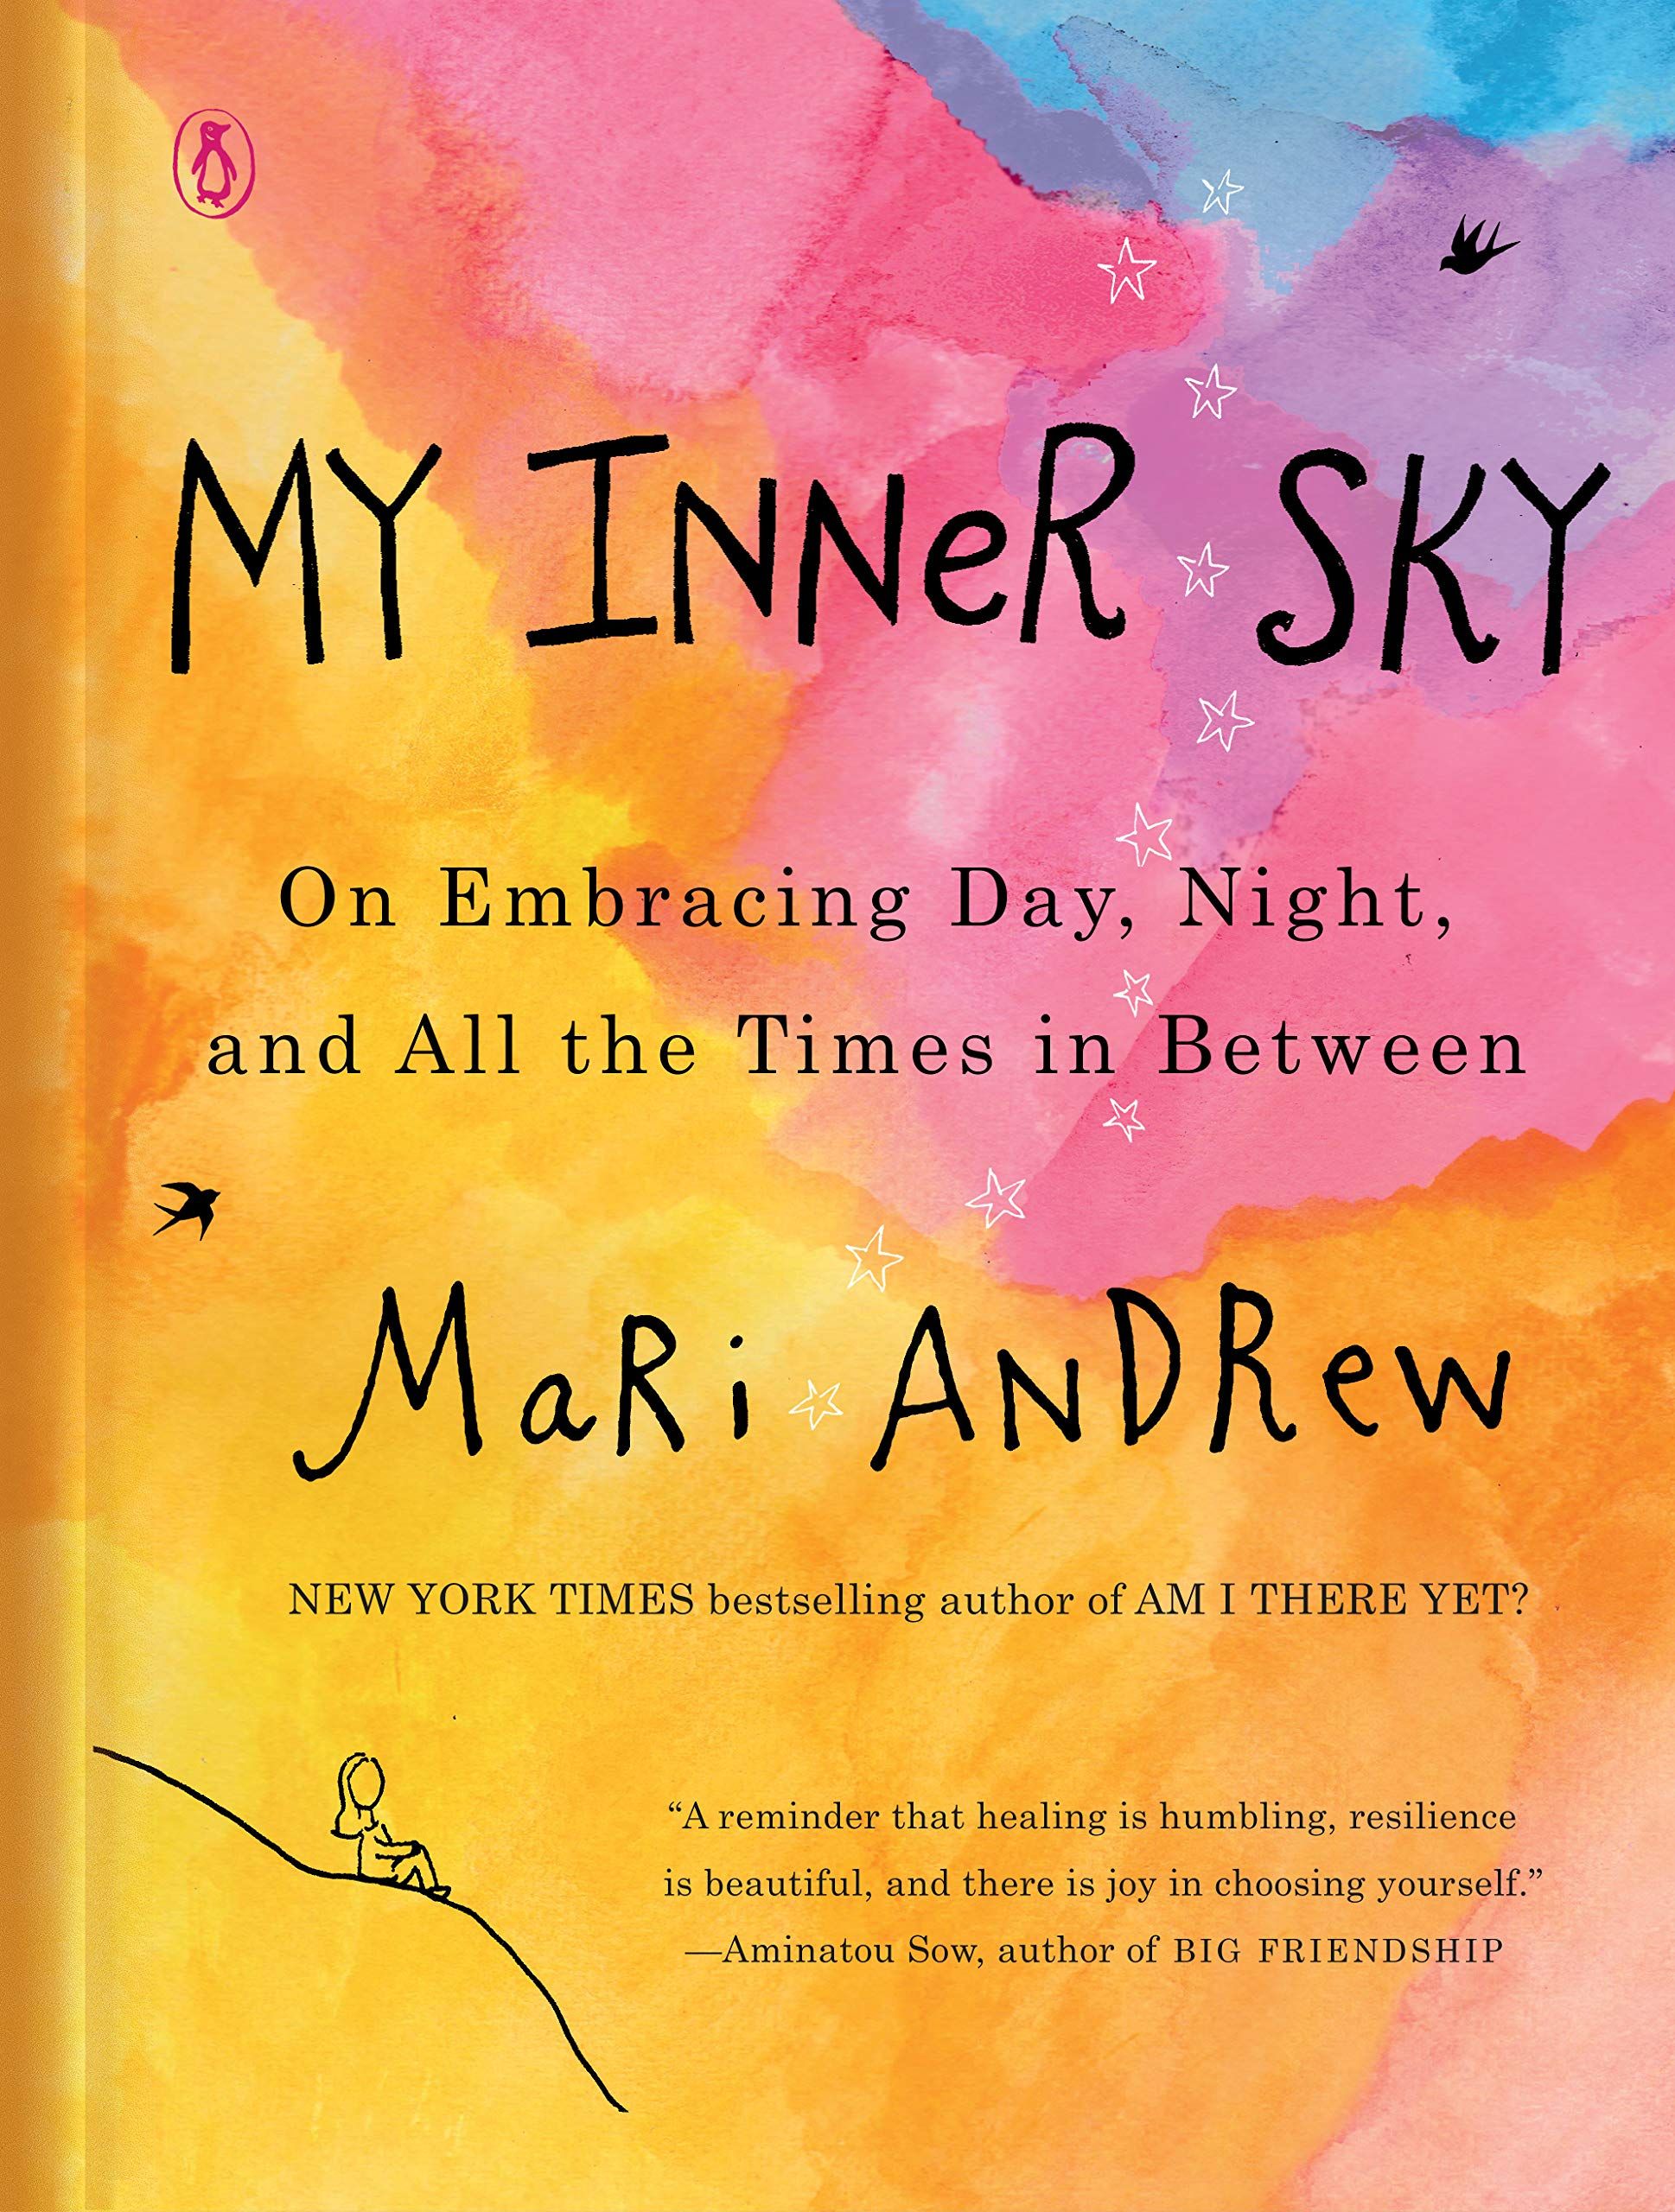 My inner sky by mari andrew book cover